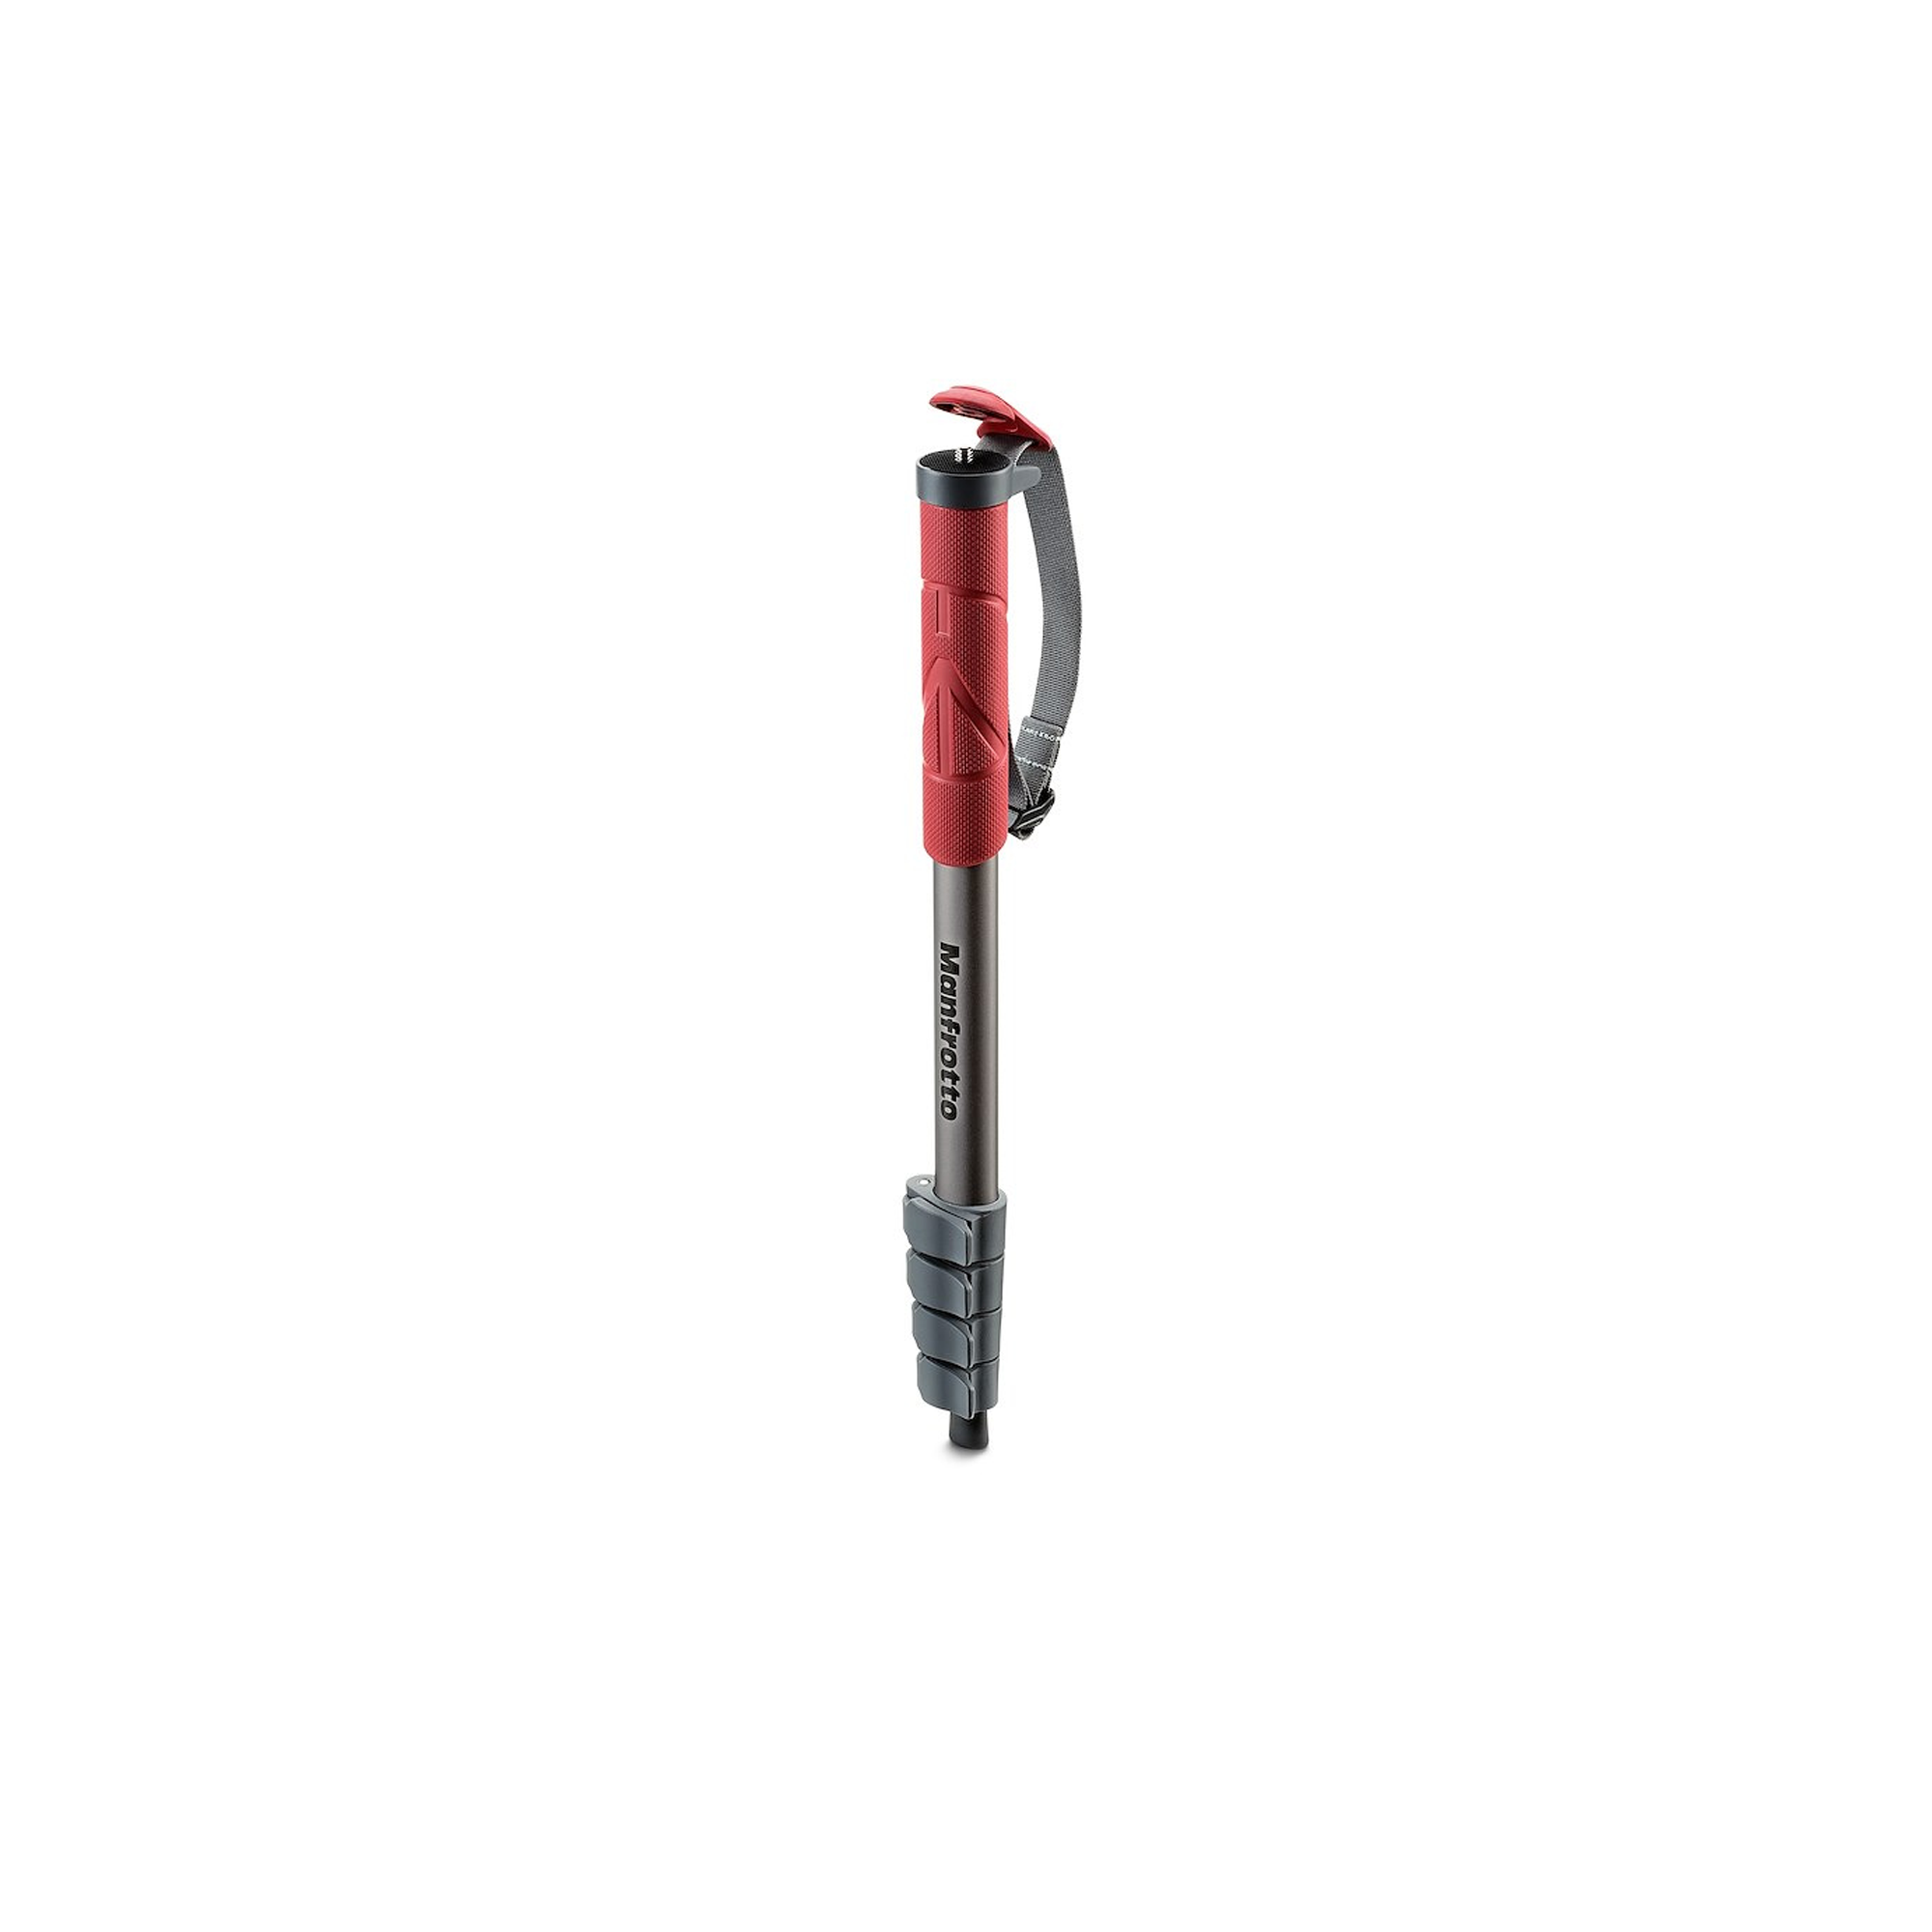 Manfrotto MMC-RD Compact Aluminum Monopod Advanced - Red